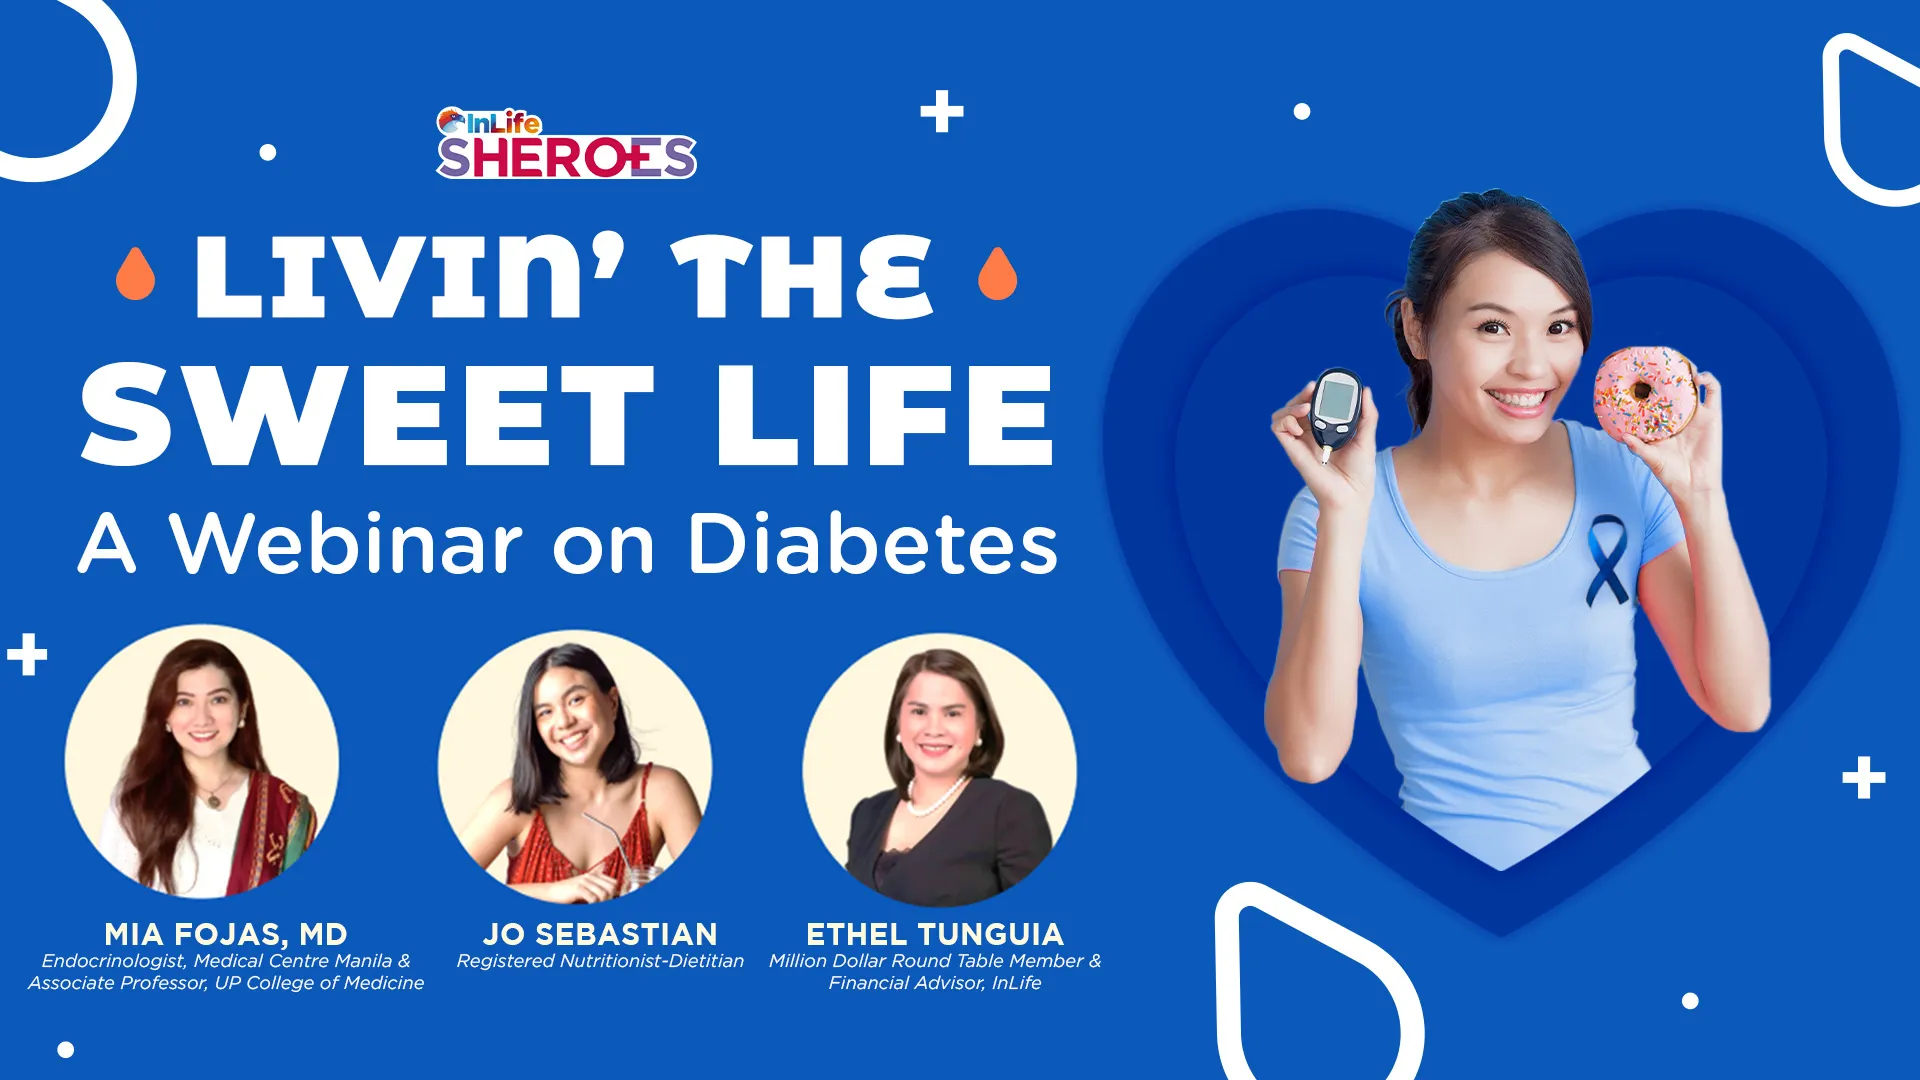 medical-nutrition-and-financial-experts-discuss-the-health-and-financial-implications-of-diabetes